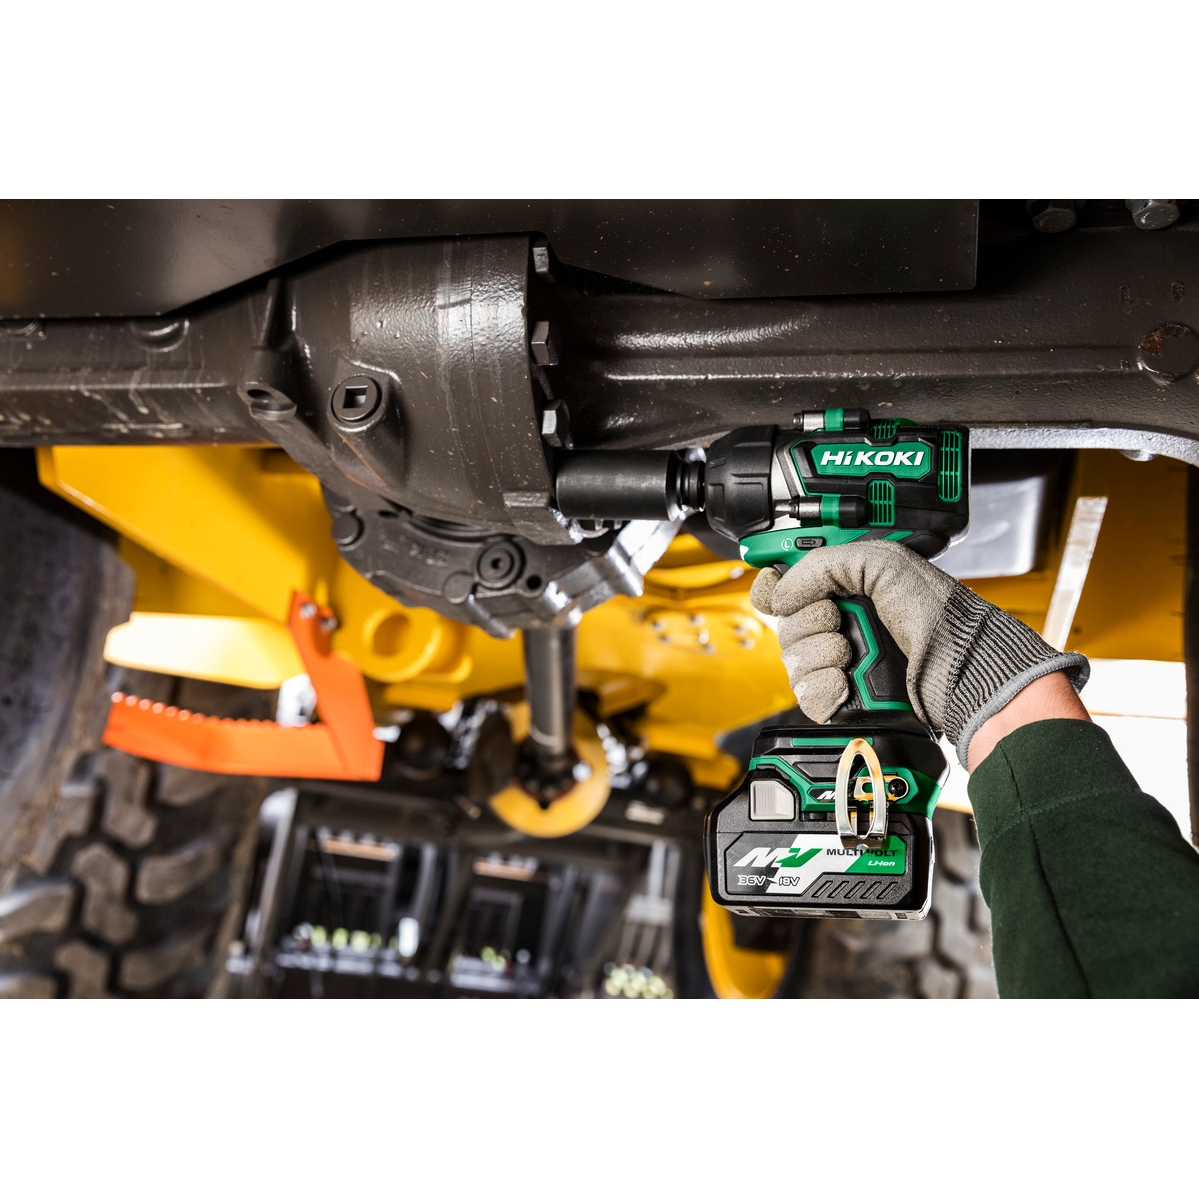 Cordless impact wrench WR36DEWRZ